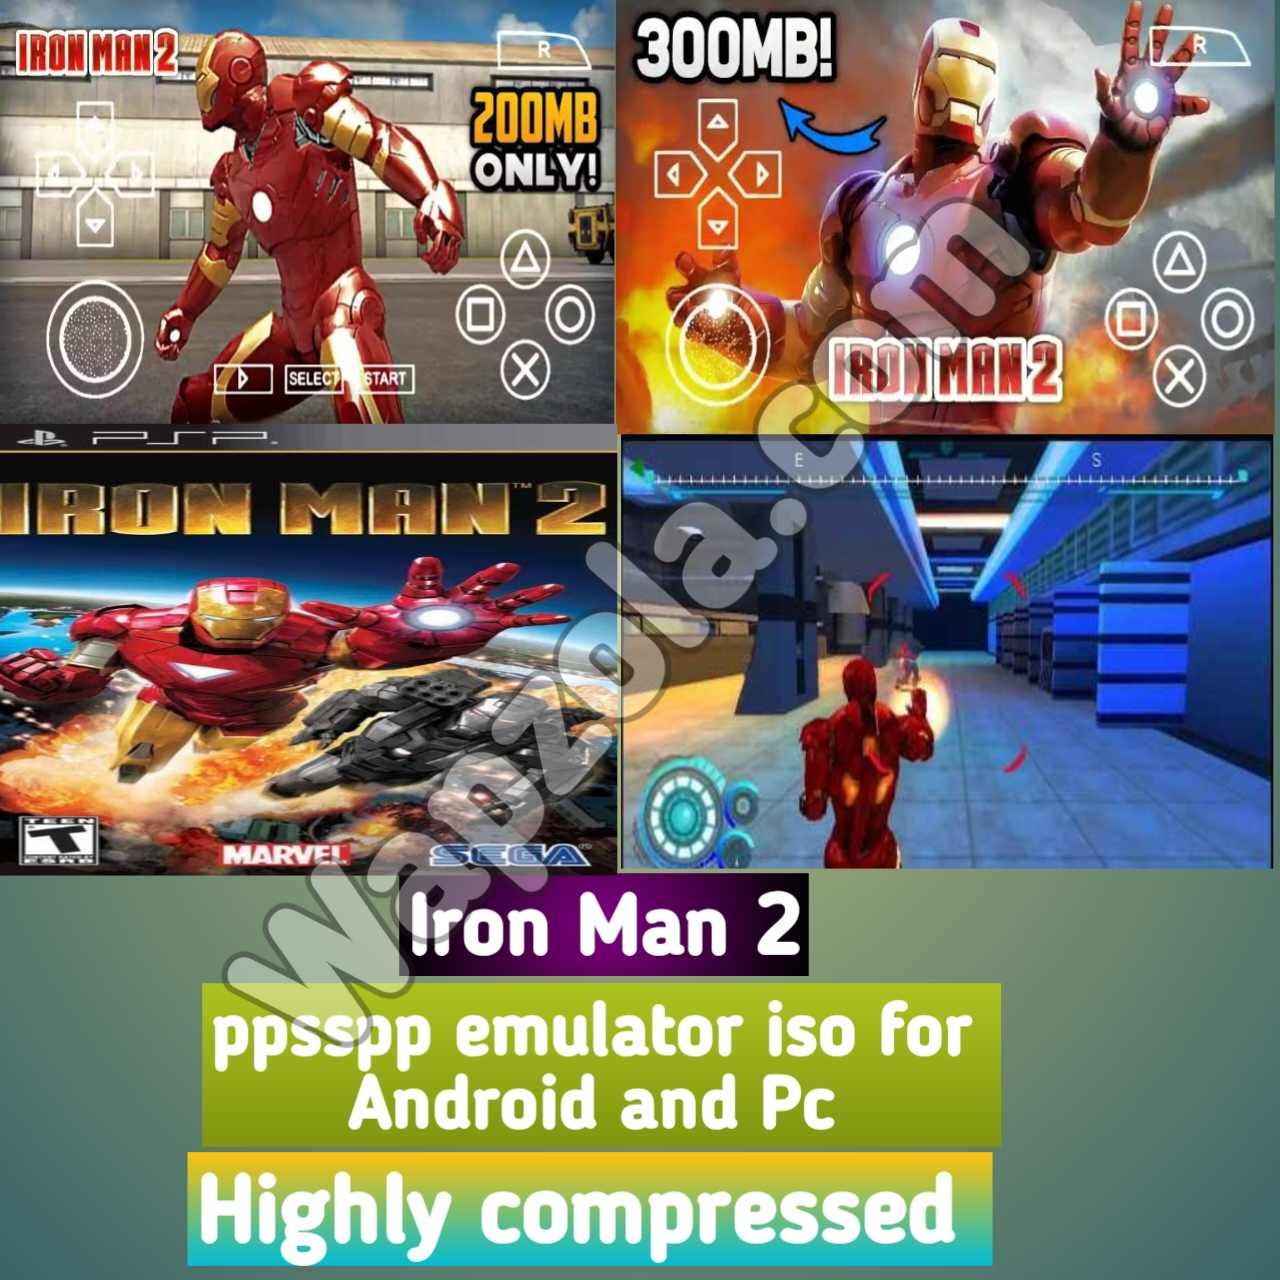 Read more about the article [Download] Iron Man 2 ppsspp emulator – PSP APK Iso highly compressed 200MB